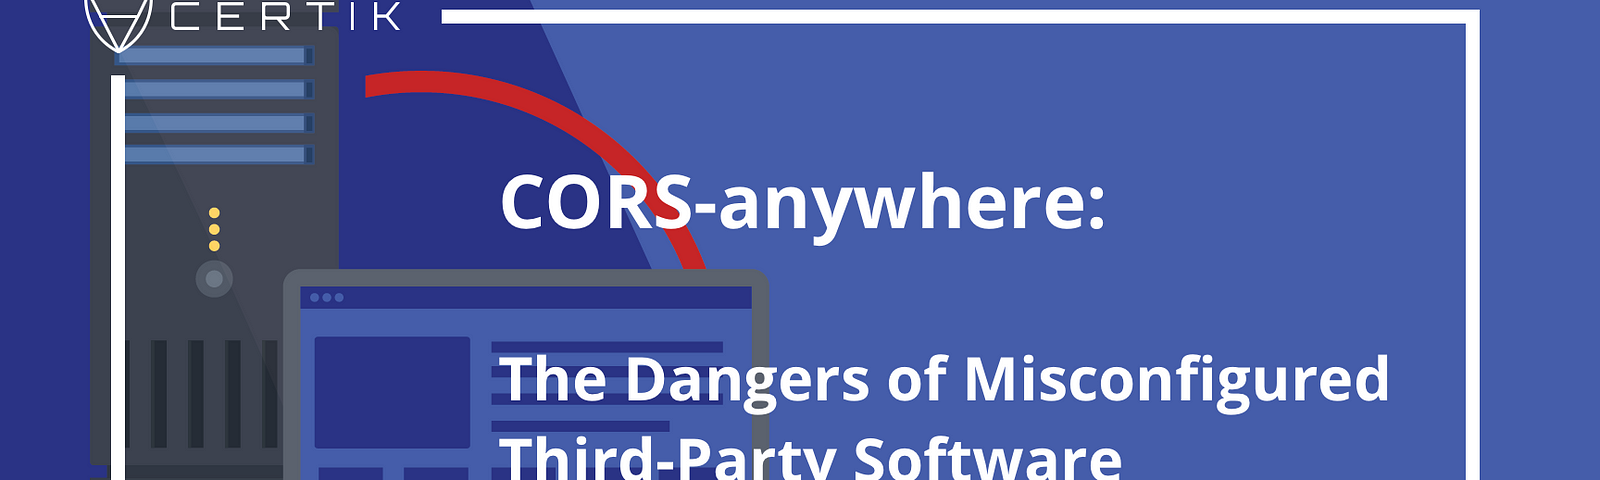 CORS-anywhere: The Dangers of Misconfigured Third-Party Software